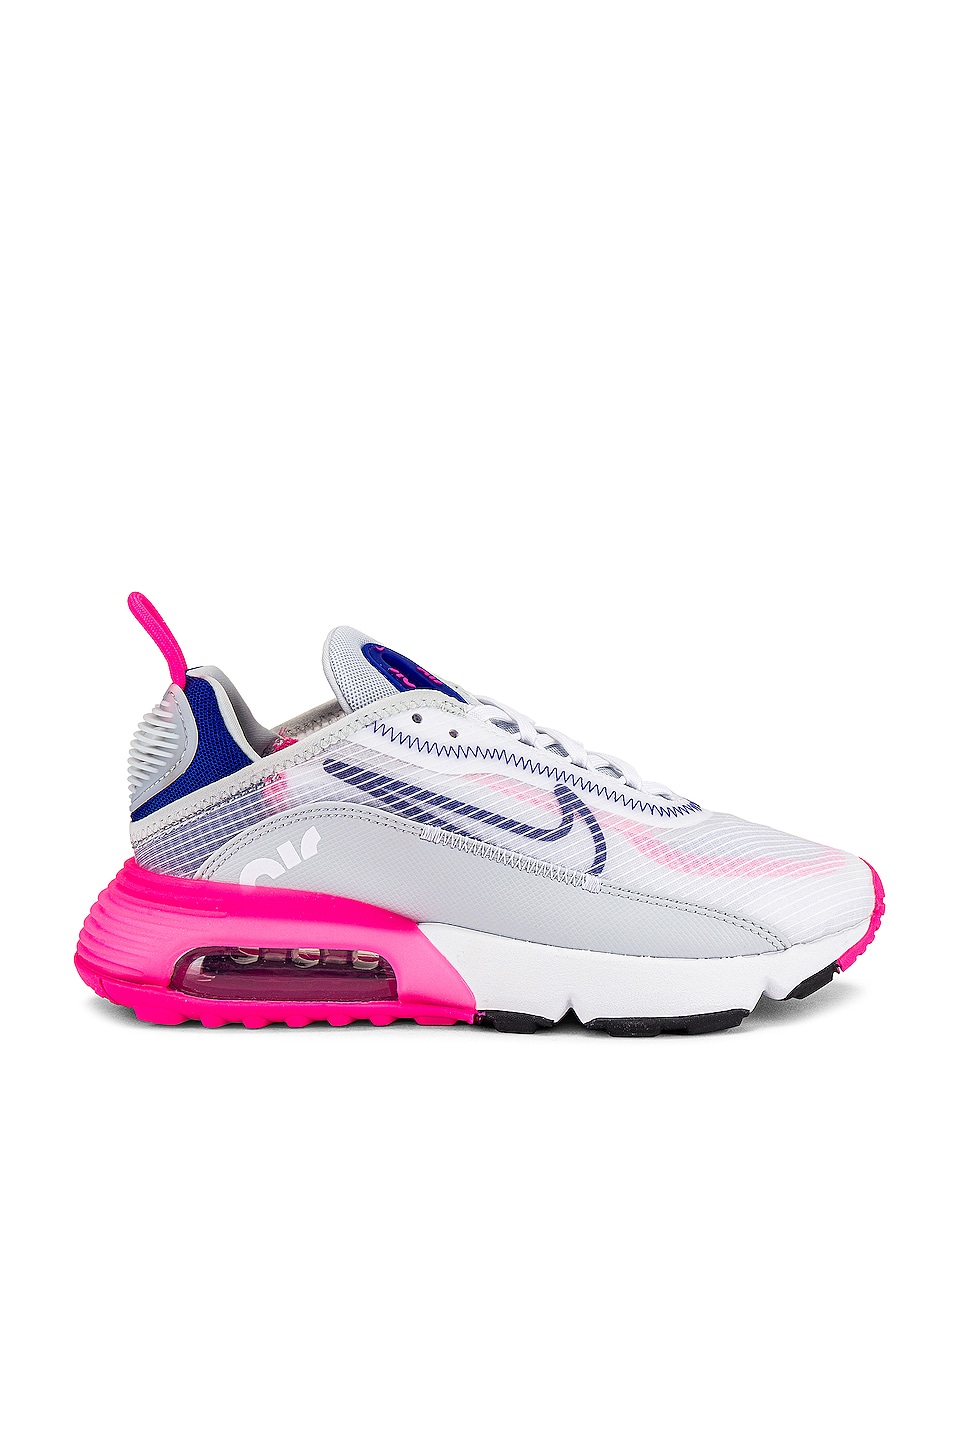 air max white and pink